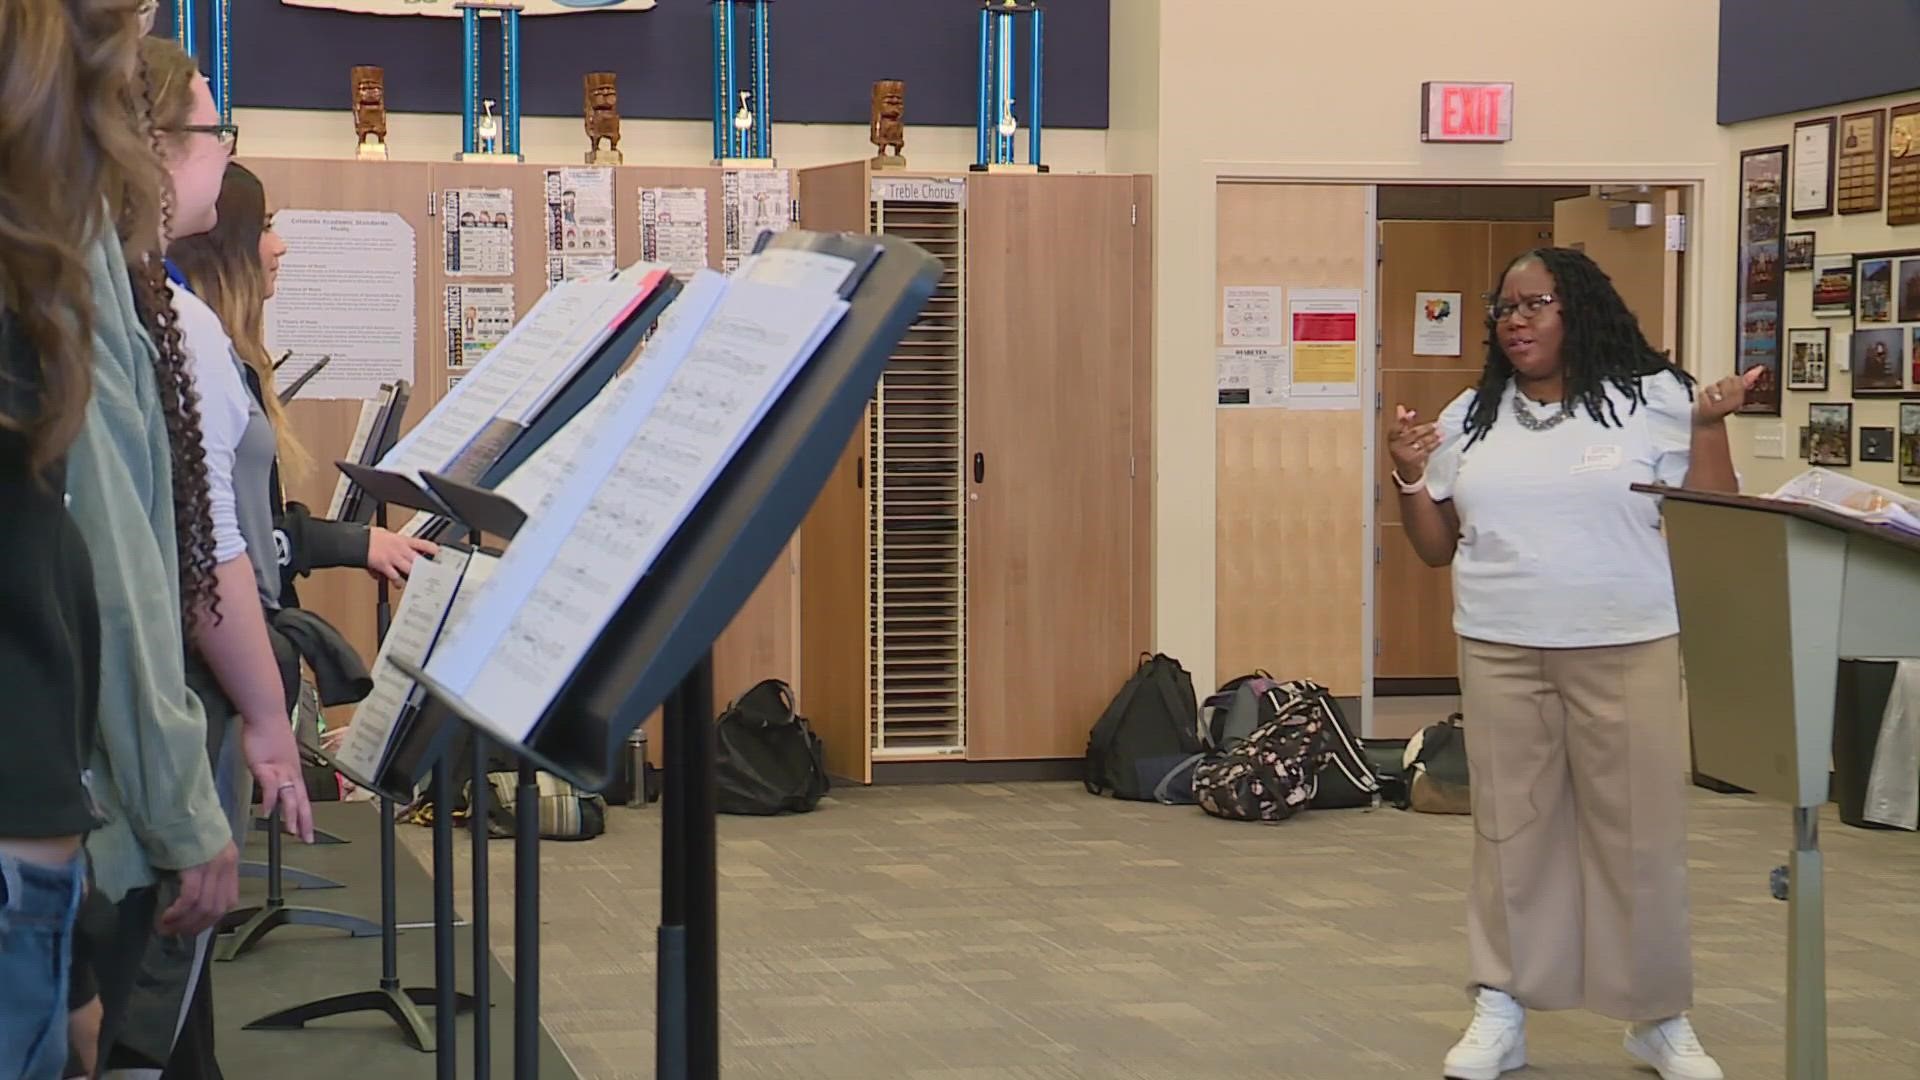 Maria Ellis said while growing up she never saw a Black conductor. She hopes her work will inspires girl and people of color to follow their musical dreams.